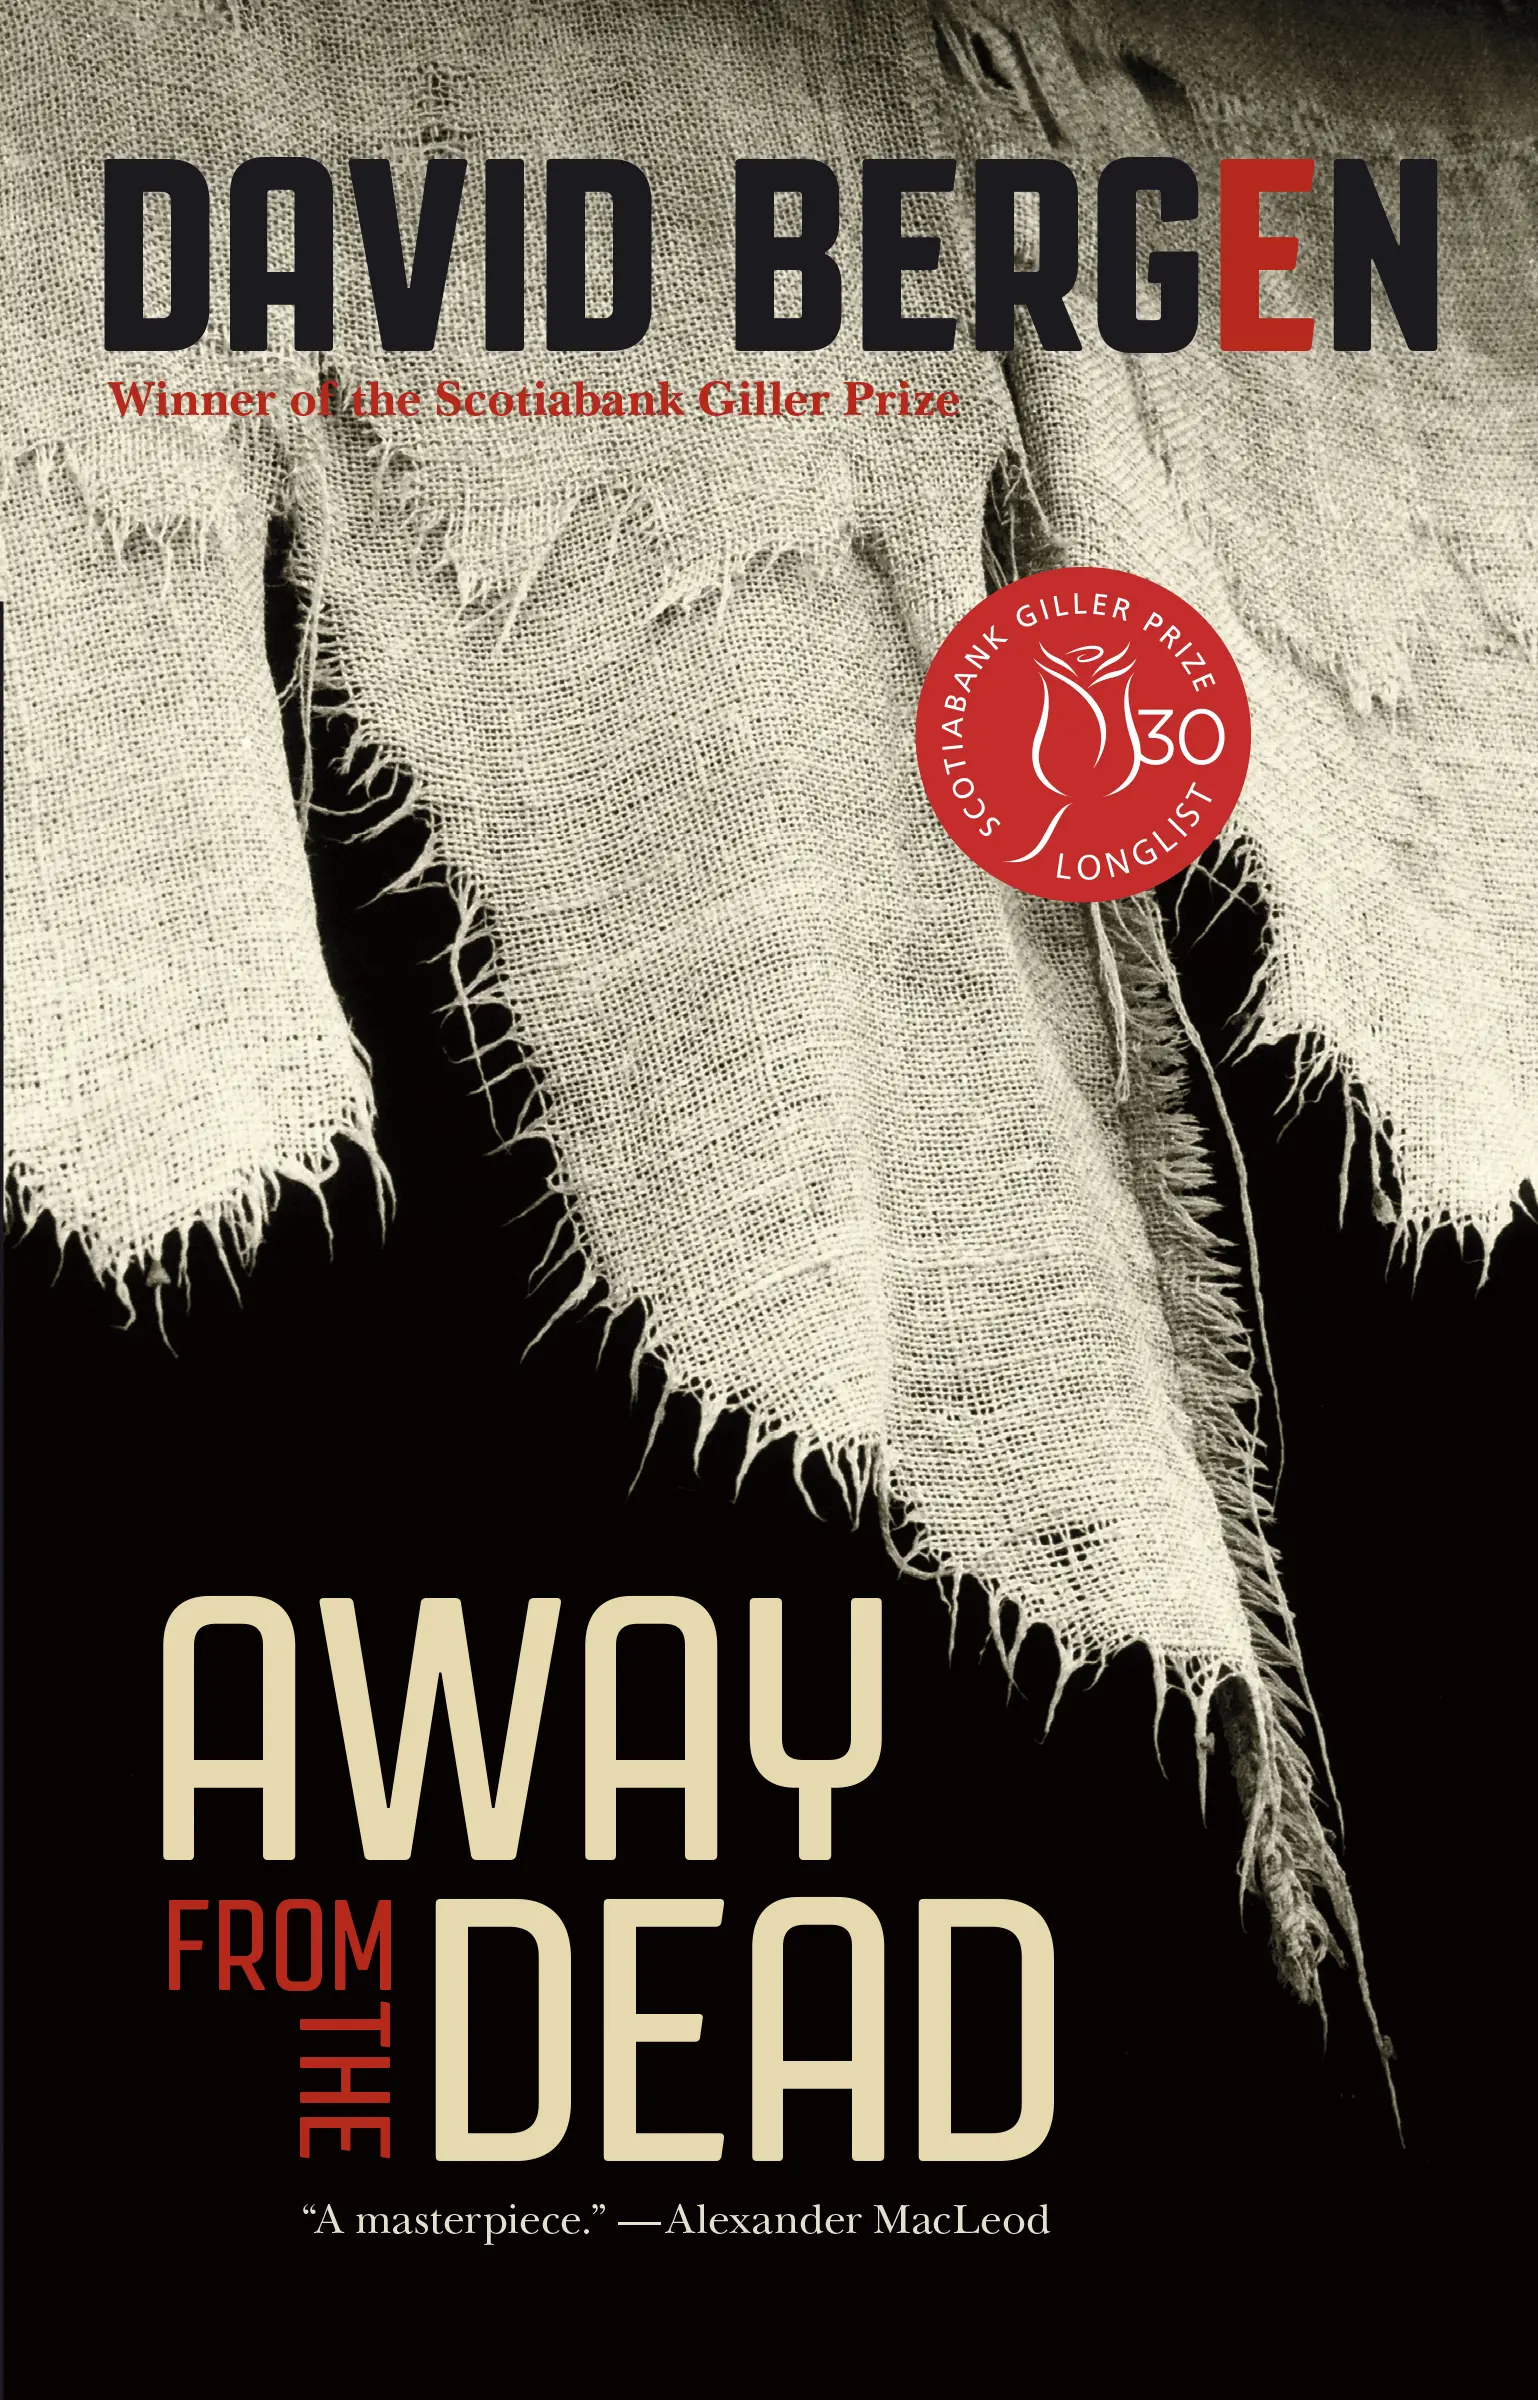 The cover of Away from the Dead by David Bergen. The cover is black, with tattered burlap seeming to blow in a breeze overtop.